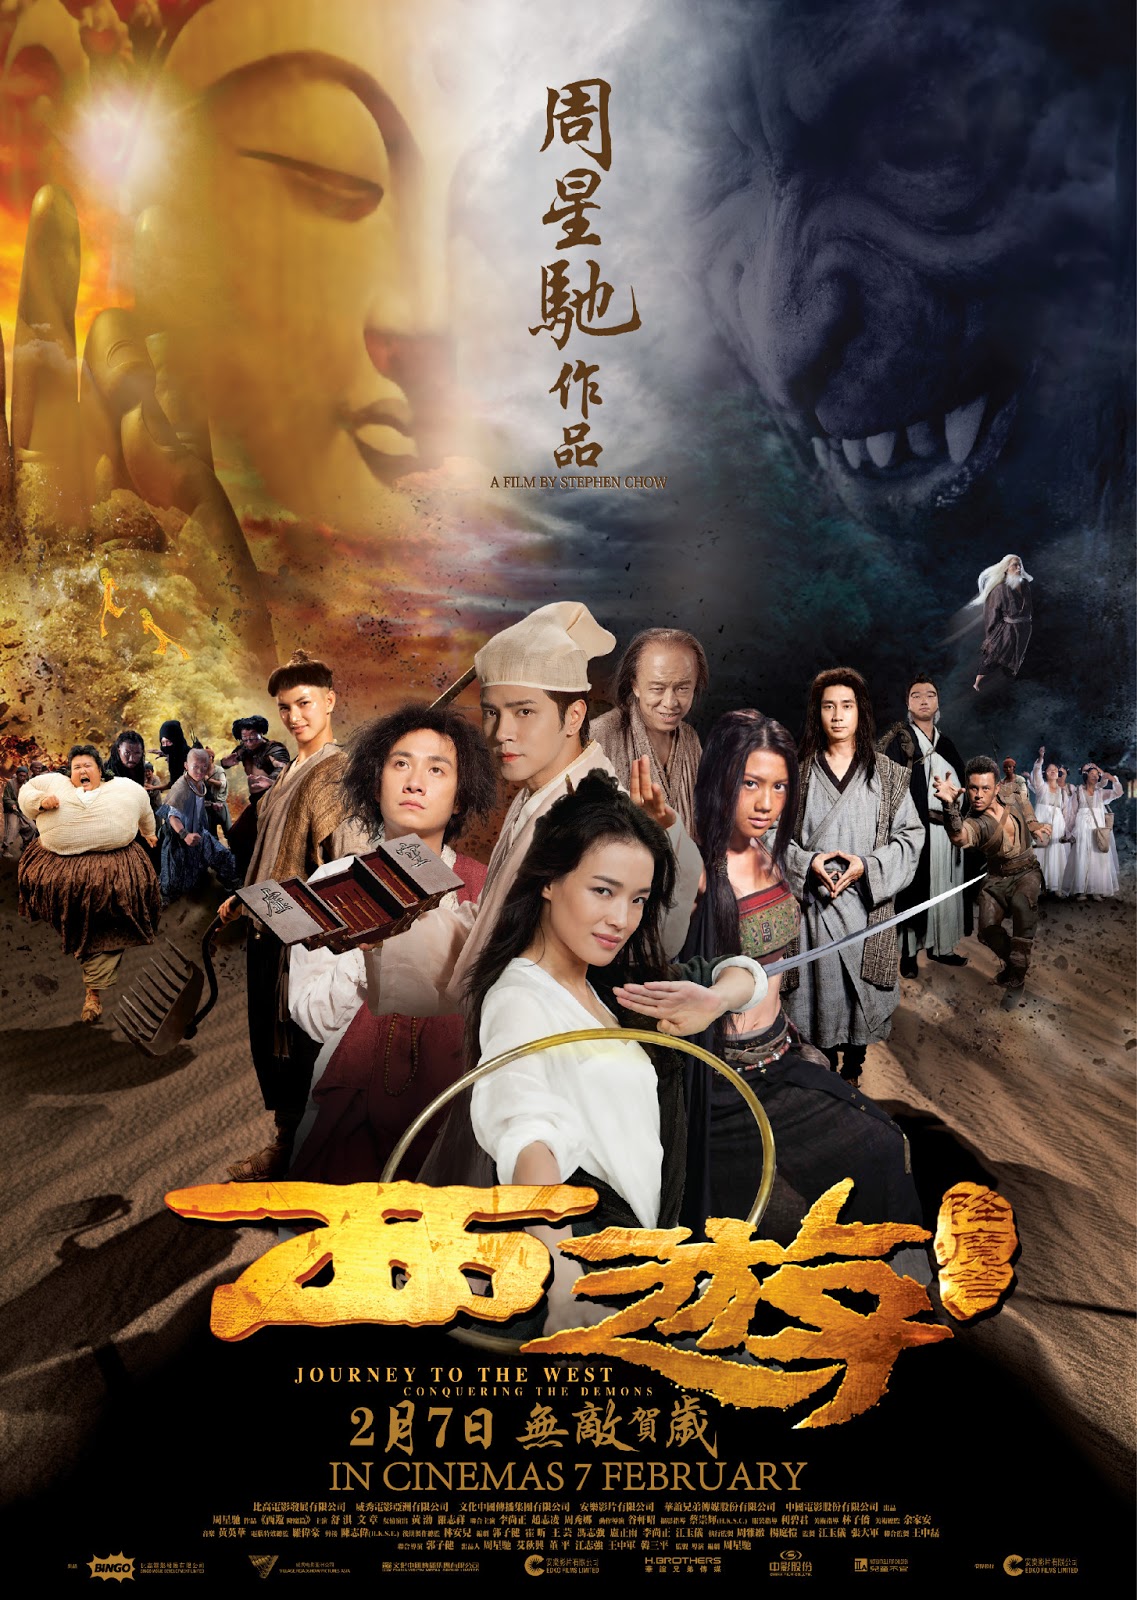 Stephen+Chow+Journey+to+the+West+Conquering+the+De  mons+Odyssey+2013+film+movie+poster+large+keyart.j  pg